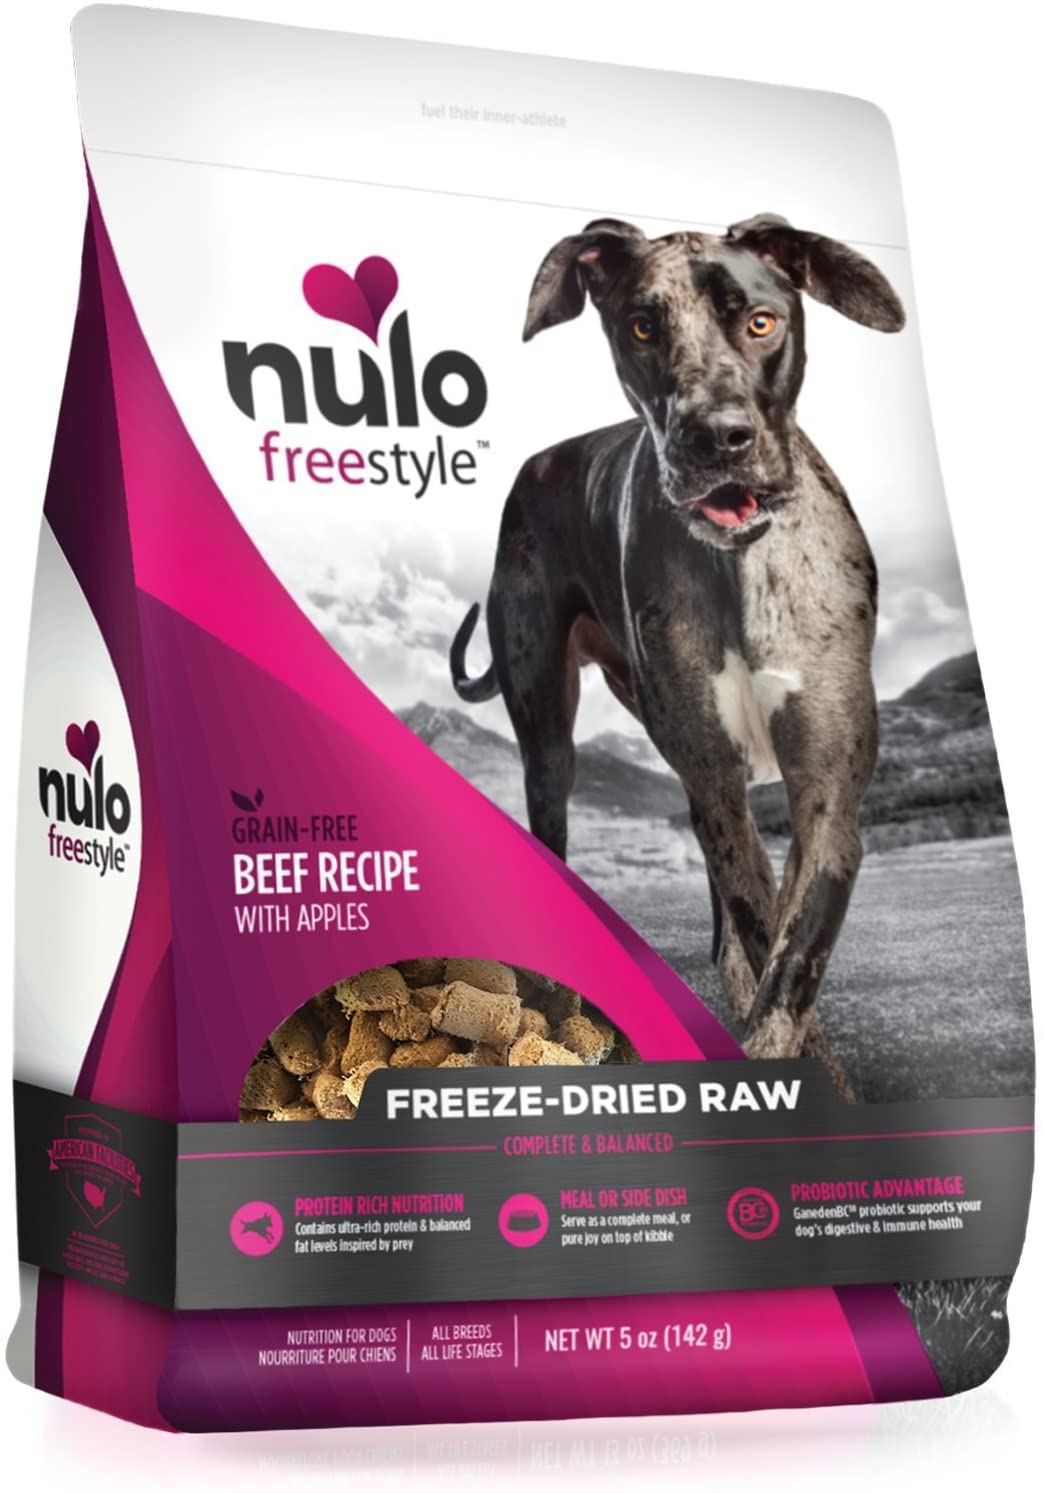 Nulo Freestyle Grain-Free Beef Recipe With Apples Freeze-Dried Raw Dog Food